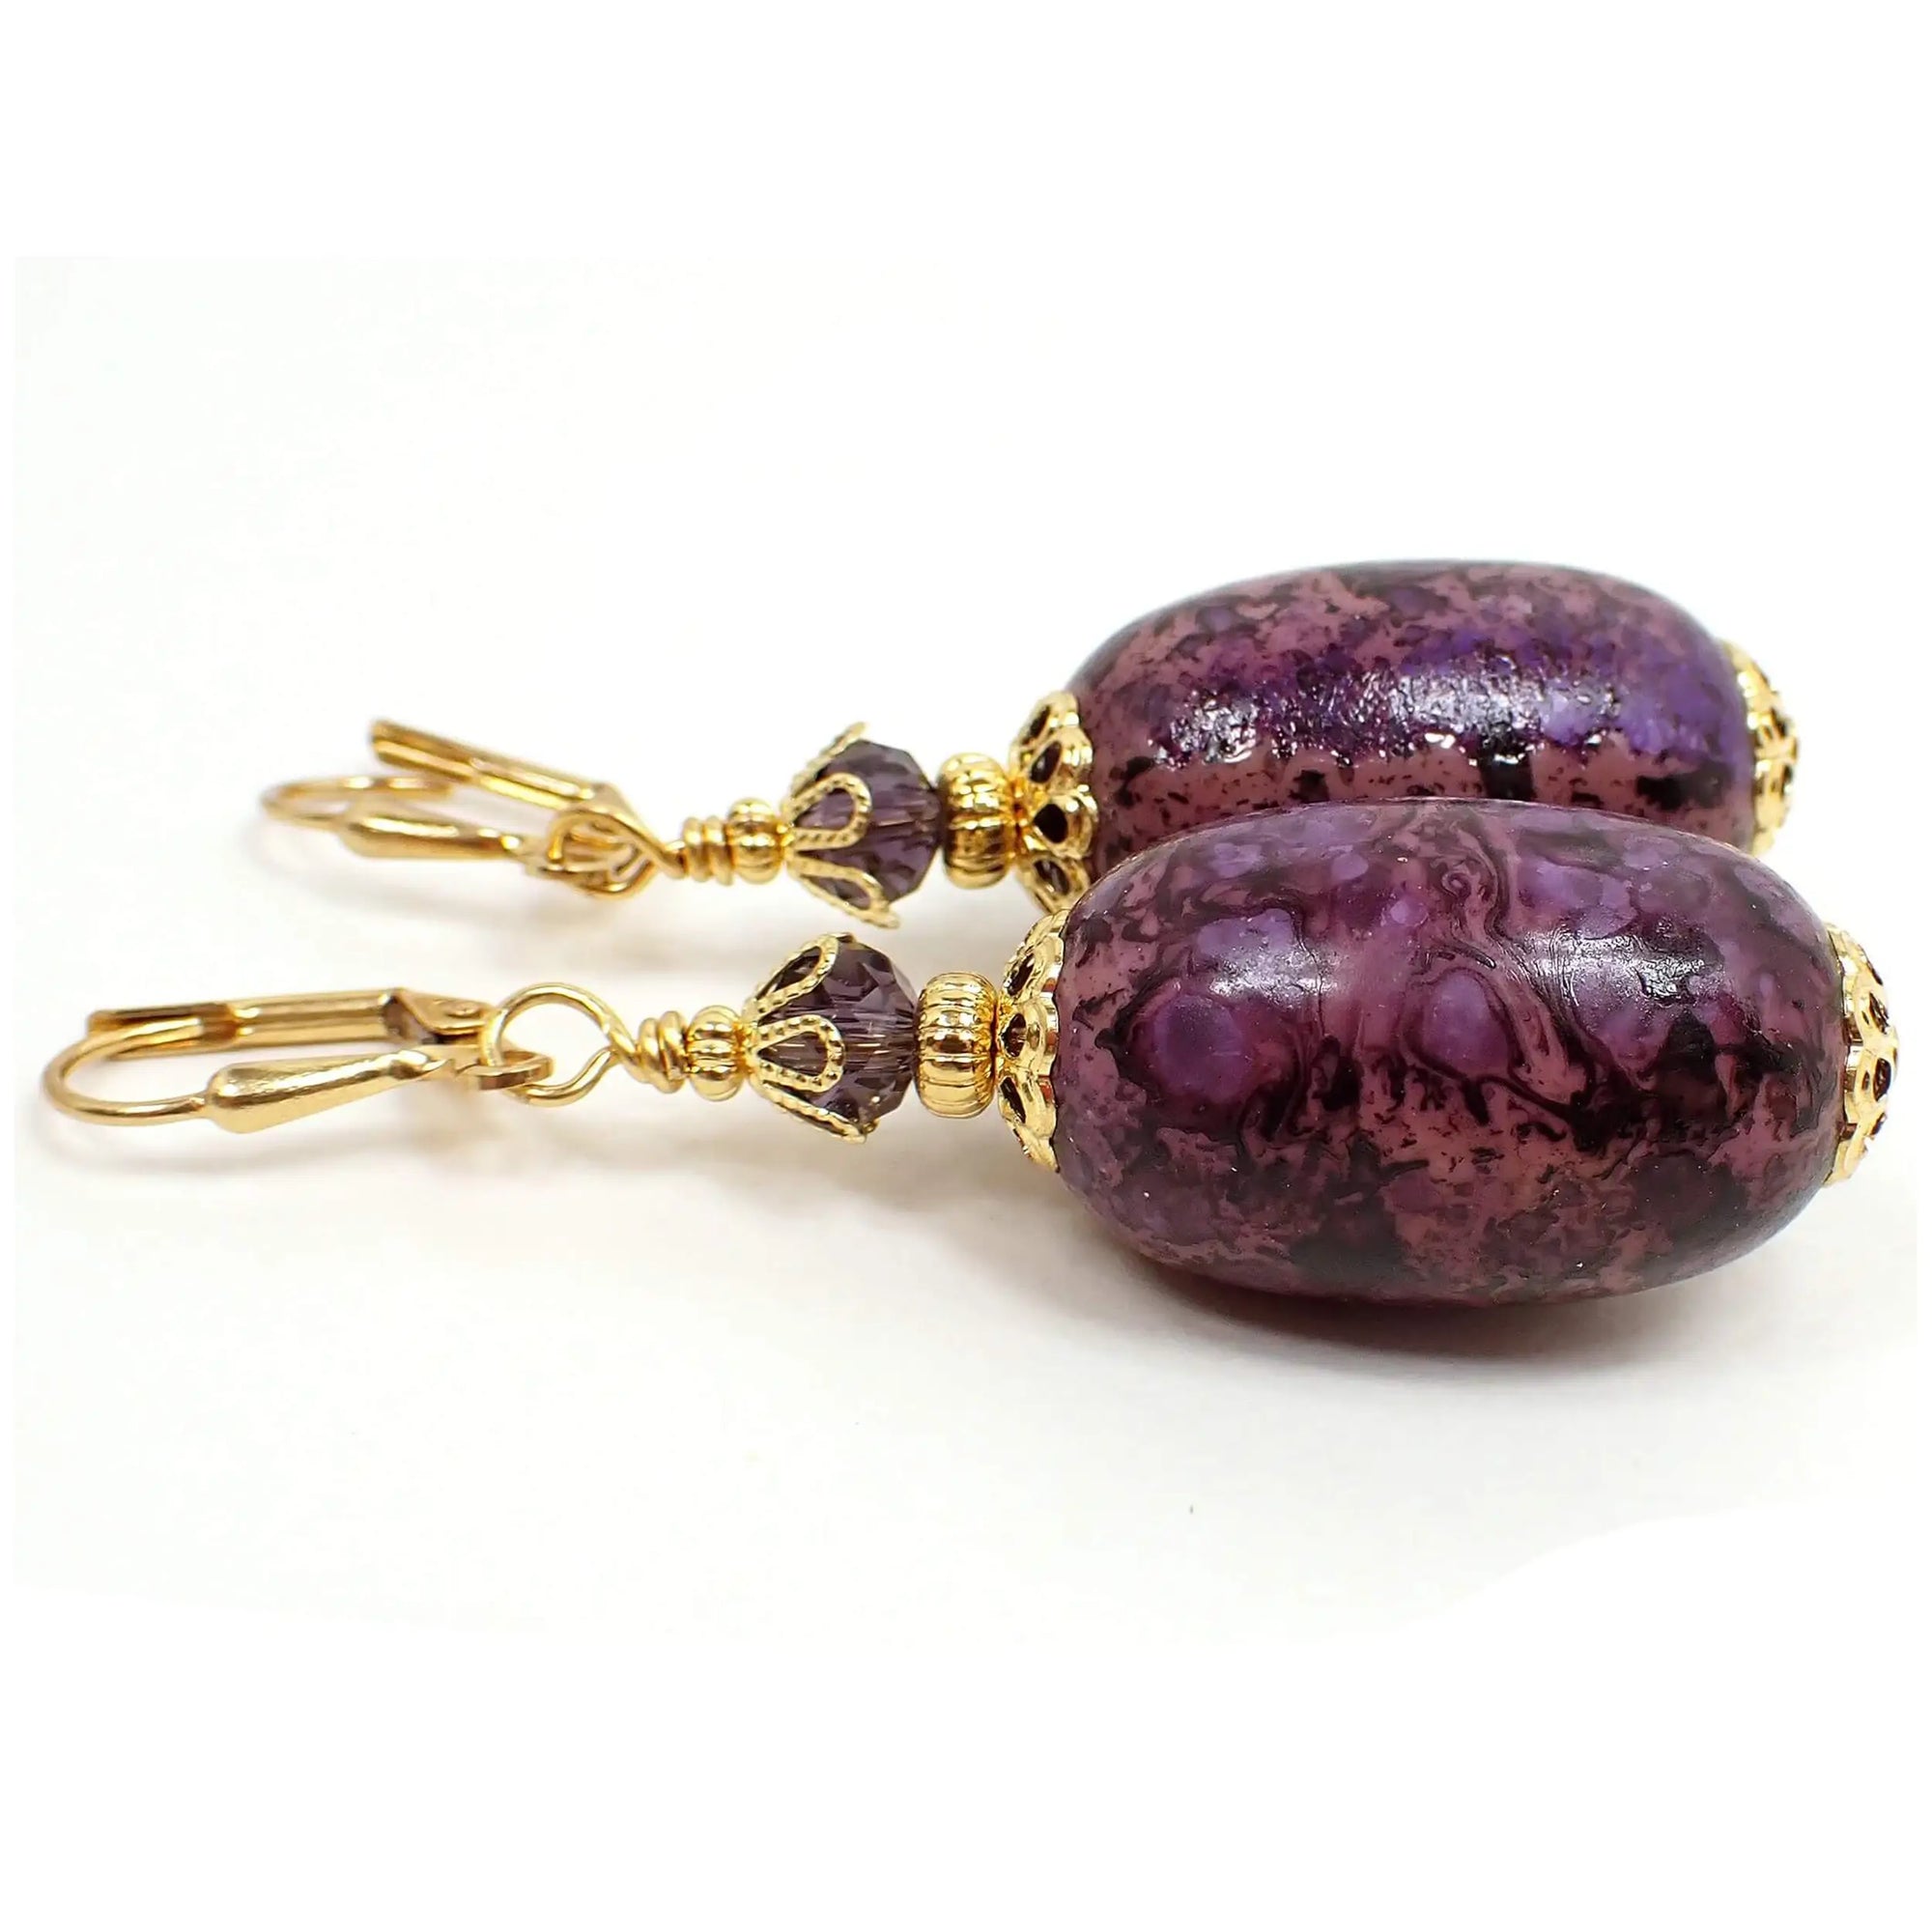 Side view of the large oval handmade drop earrings. The metal is gold plated in color. There are purple faceted glass crystal beads at the top. The bottom acrylic beads are large oval shaped and have a marbled pattern with purple and pink.